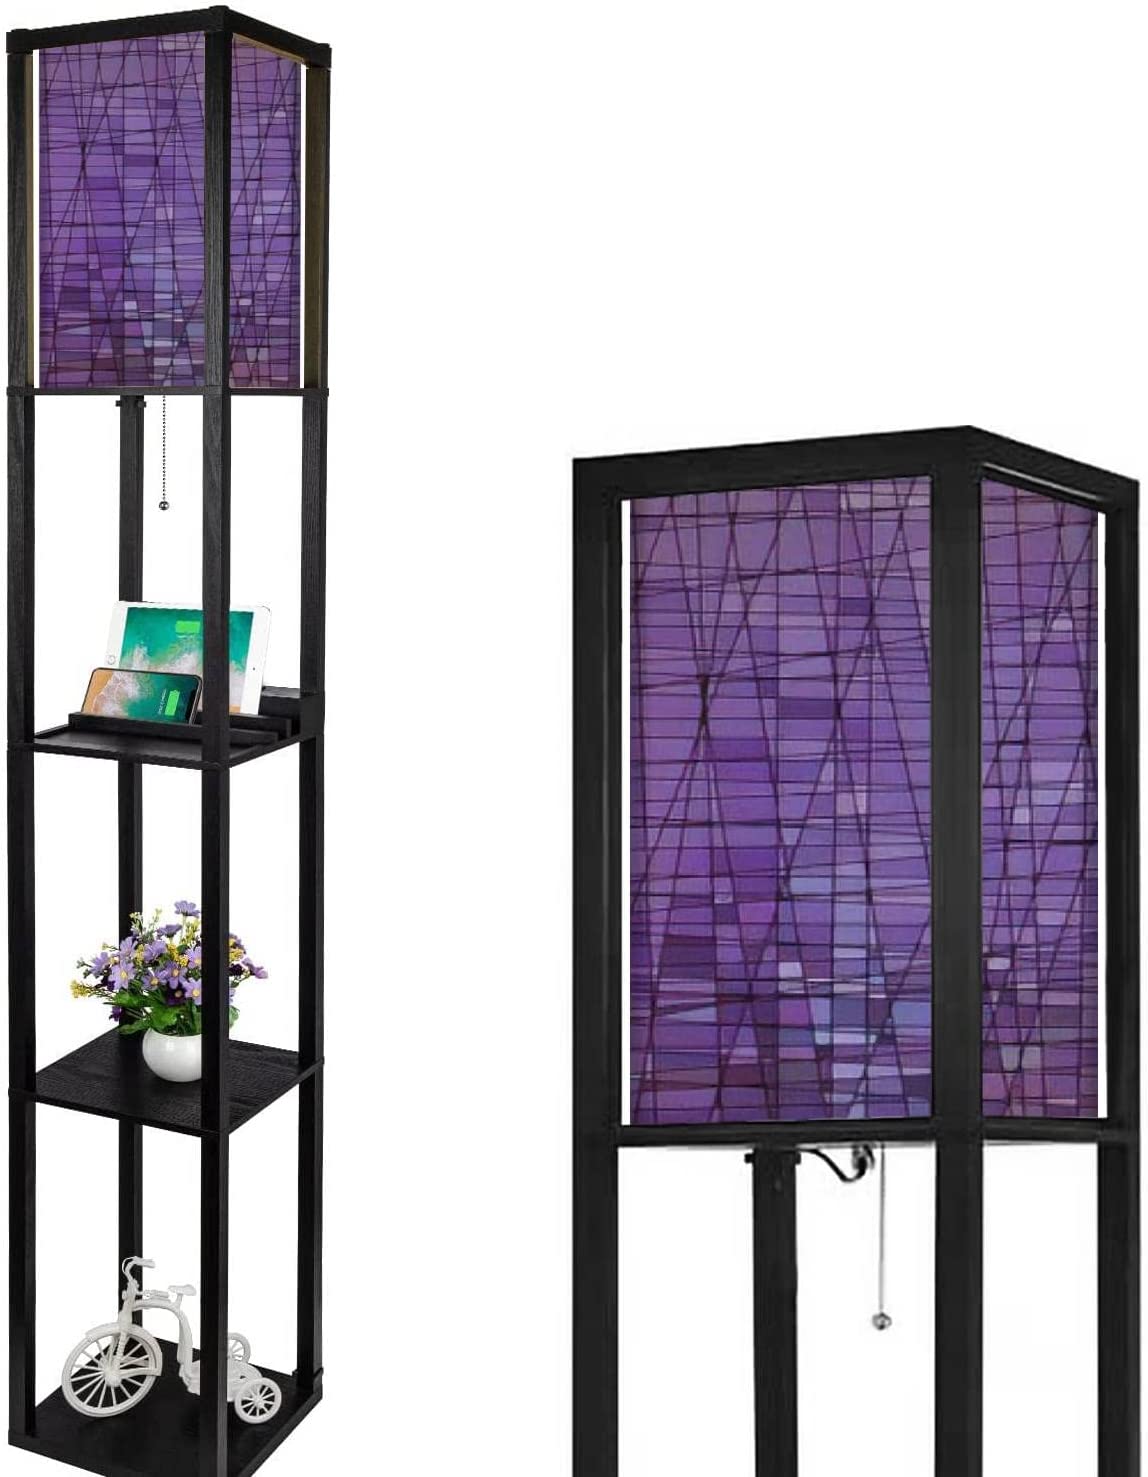 SHADY Abstract Stained Glass Mosaic  Violet Floor Lamp with Shelves USB Ports &amp; Power Outlet Linen Fabric Shade Corner Standing Lamp for Living Room